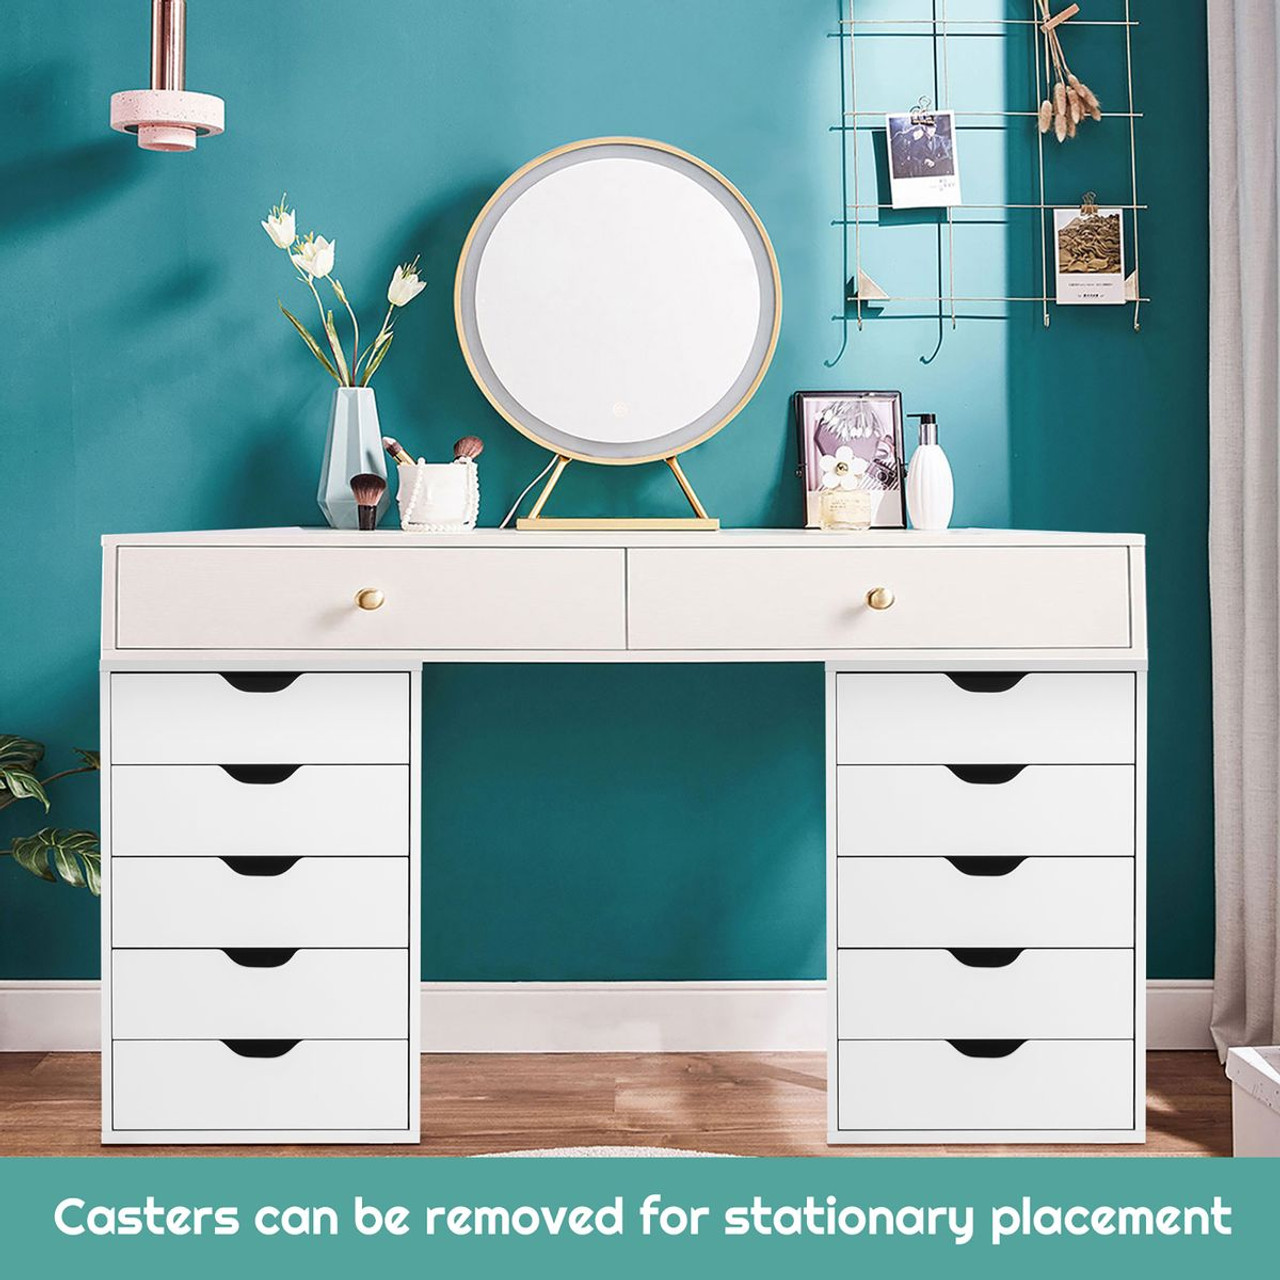 Costway 5-Drawer Storage Dresser with Wheels product image